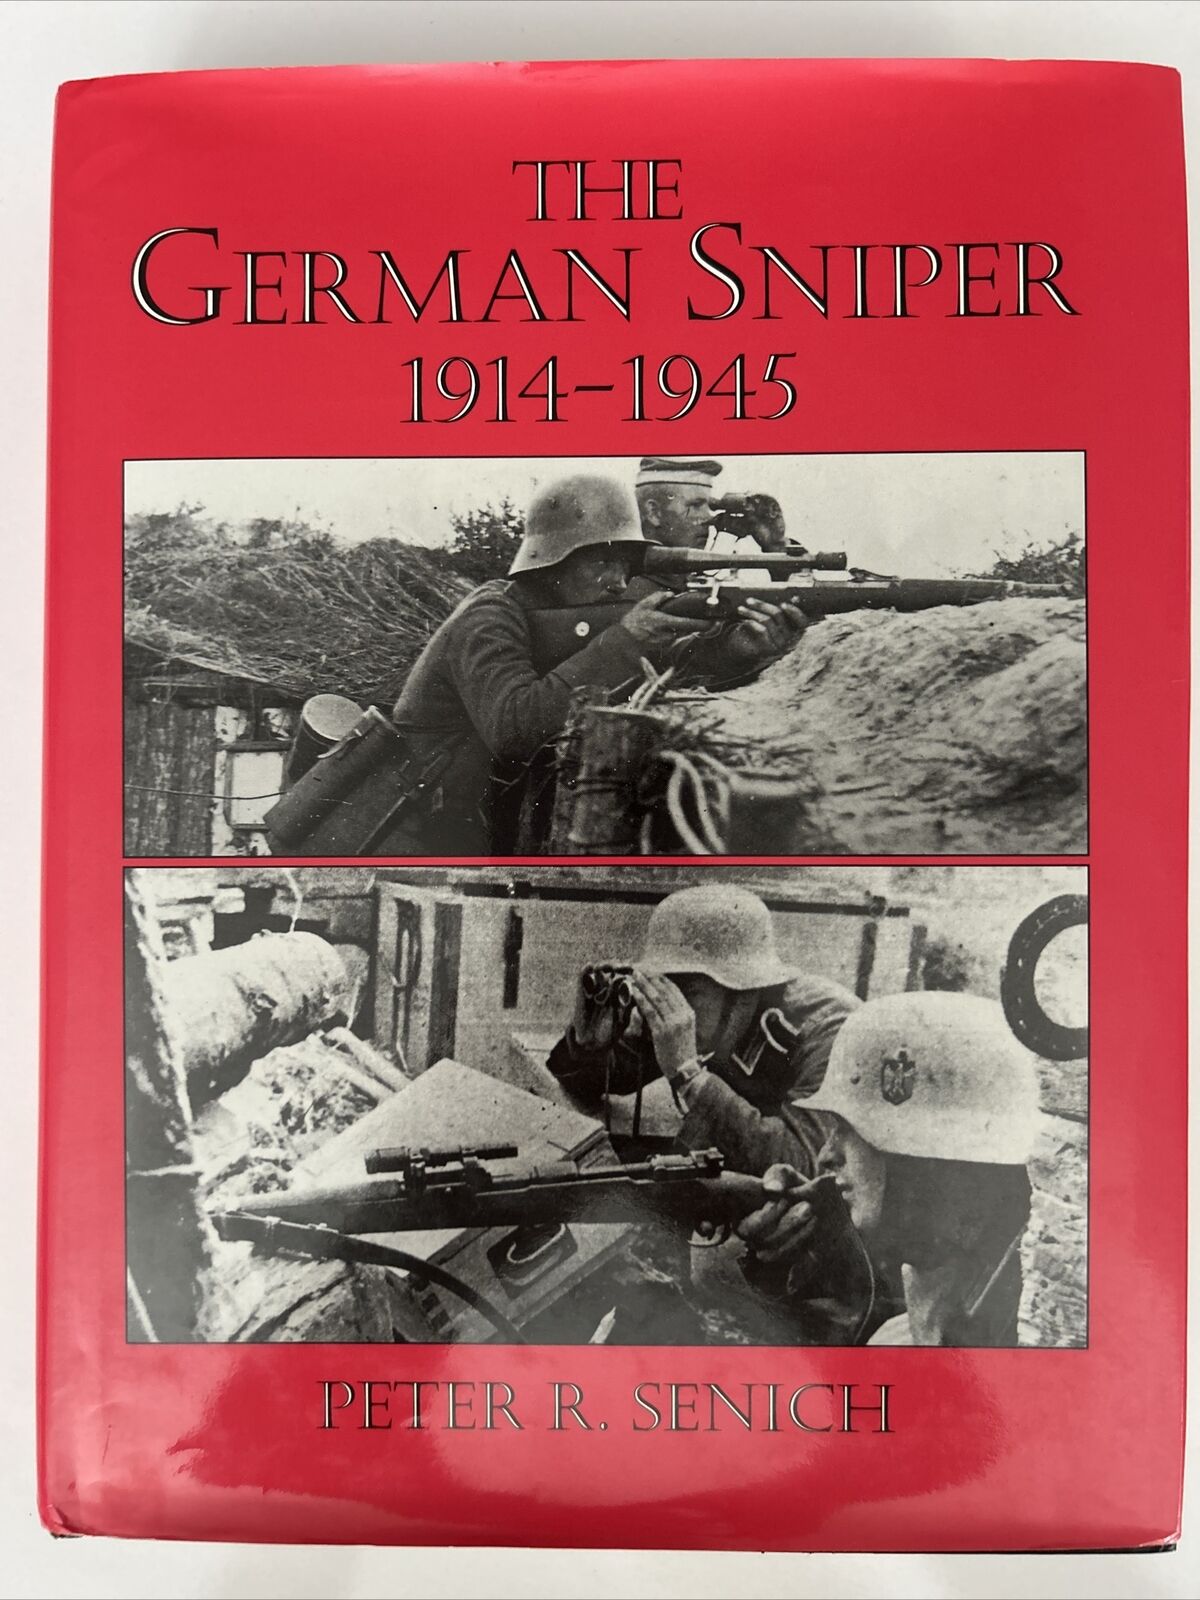 The German Sniper, 1914-1945 by Peter R. Senich (1982, Hardcover)